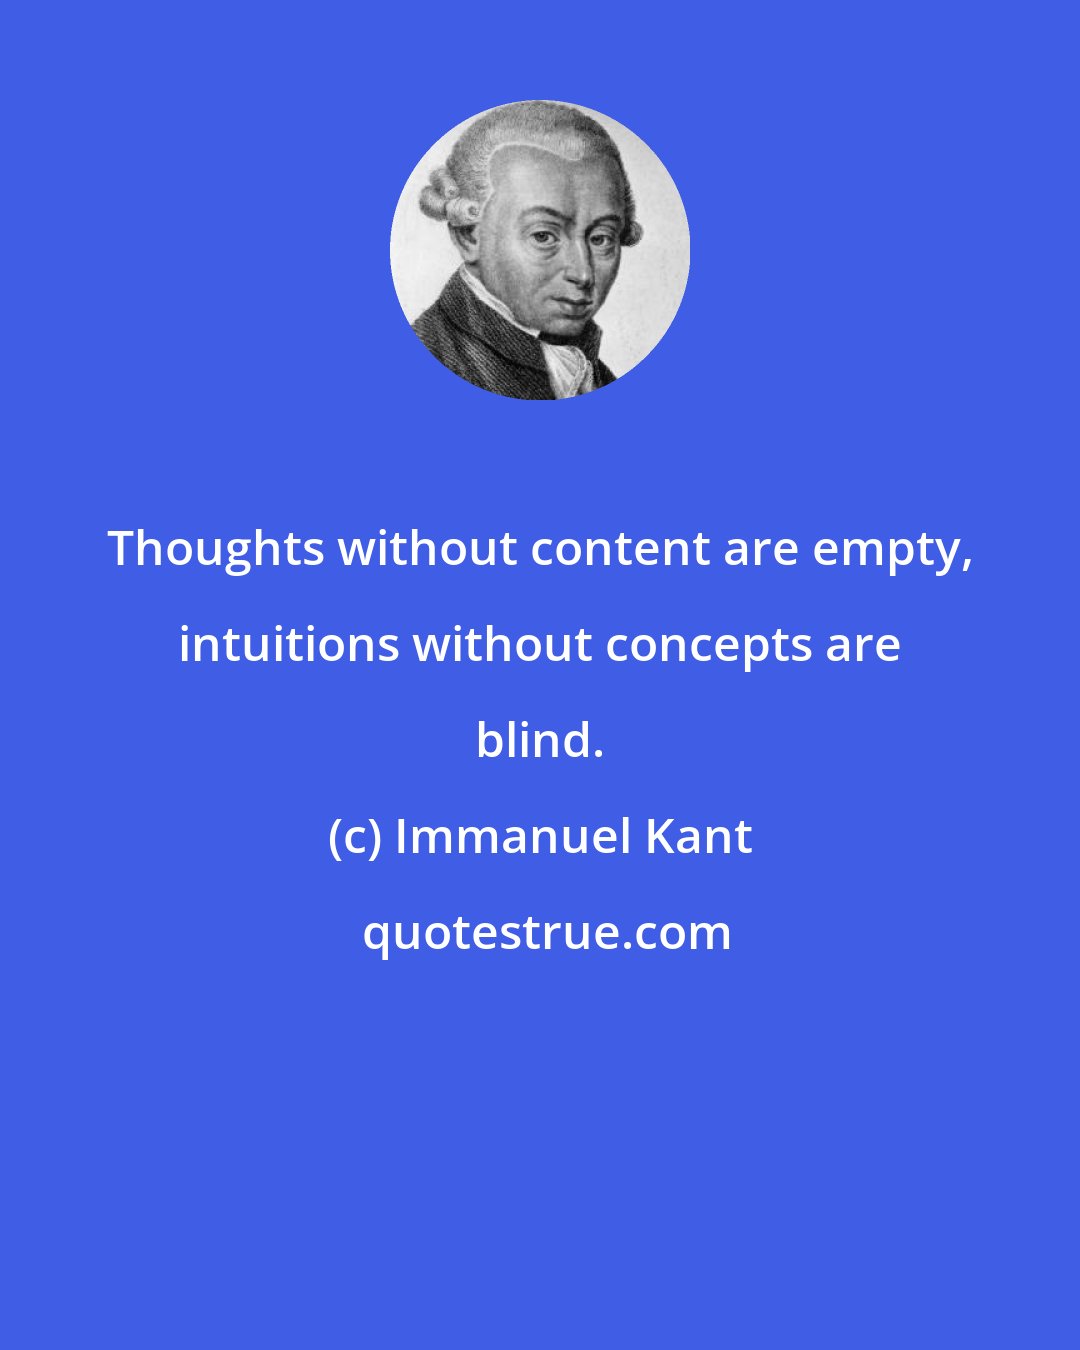 Immanuel Kant: Thoughts without content are empty, intuitions without concepts are blind.